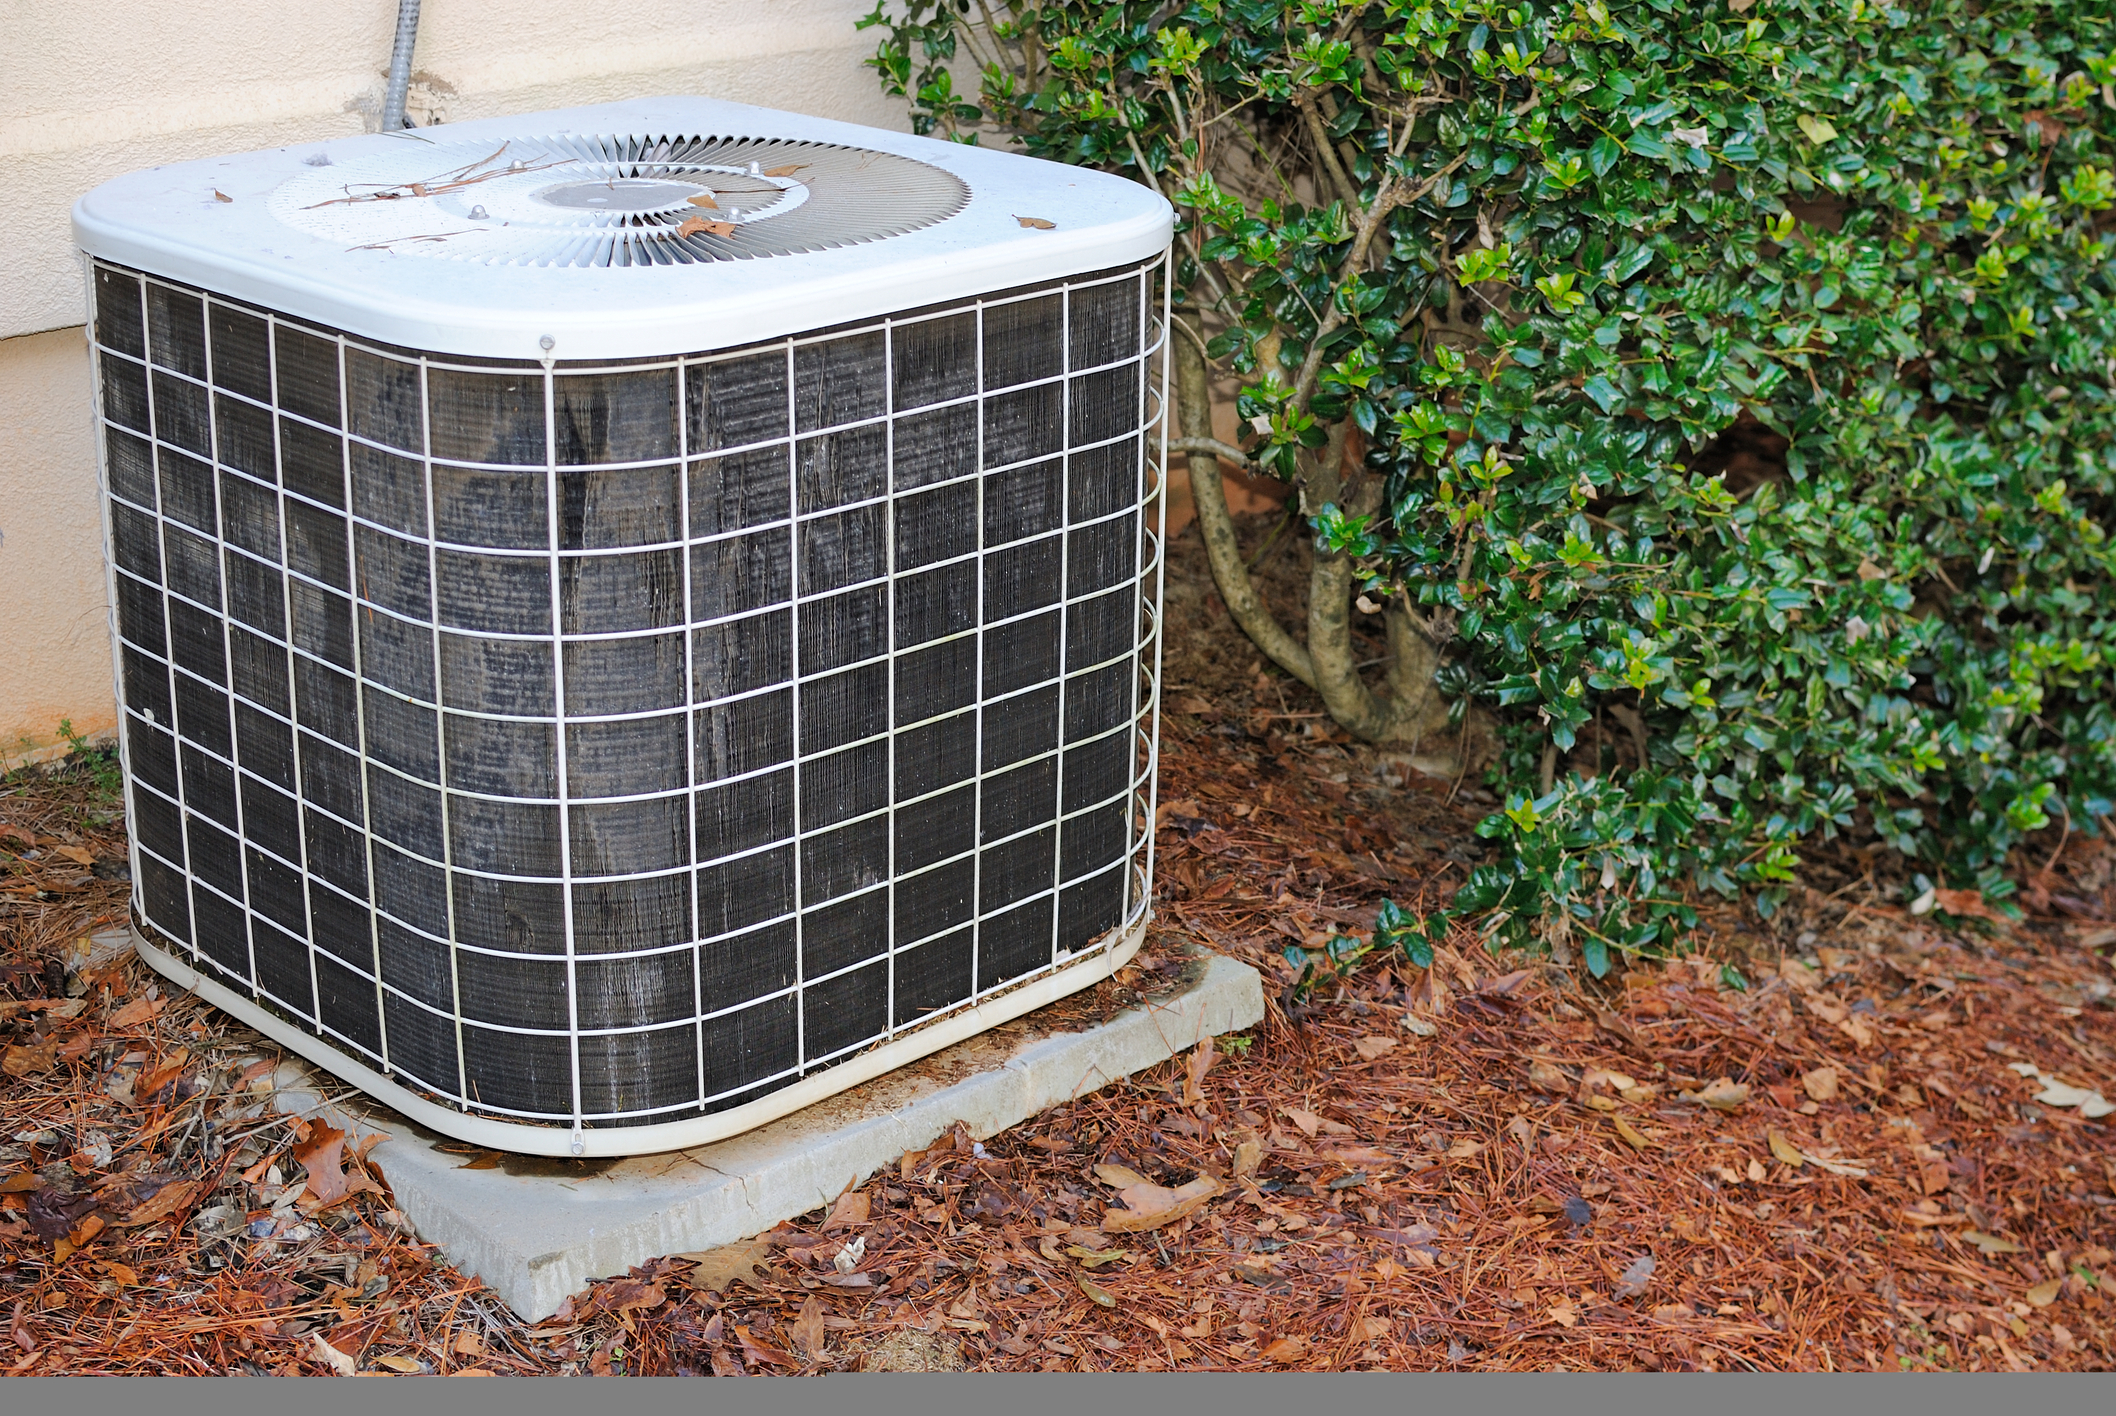 How Often Should My Home’s Air Conditioner Be Serviced?